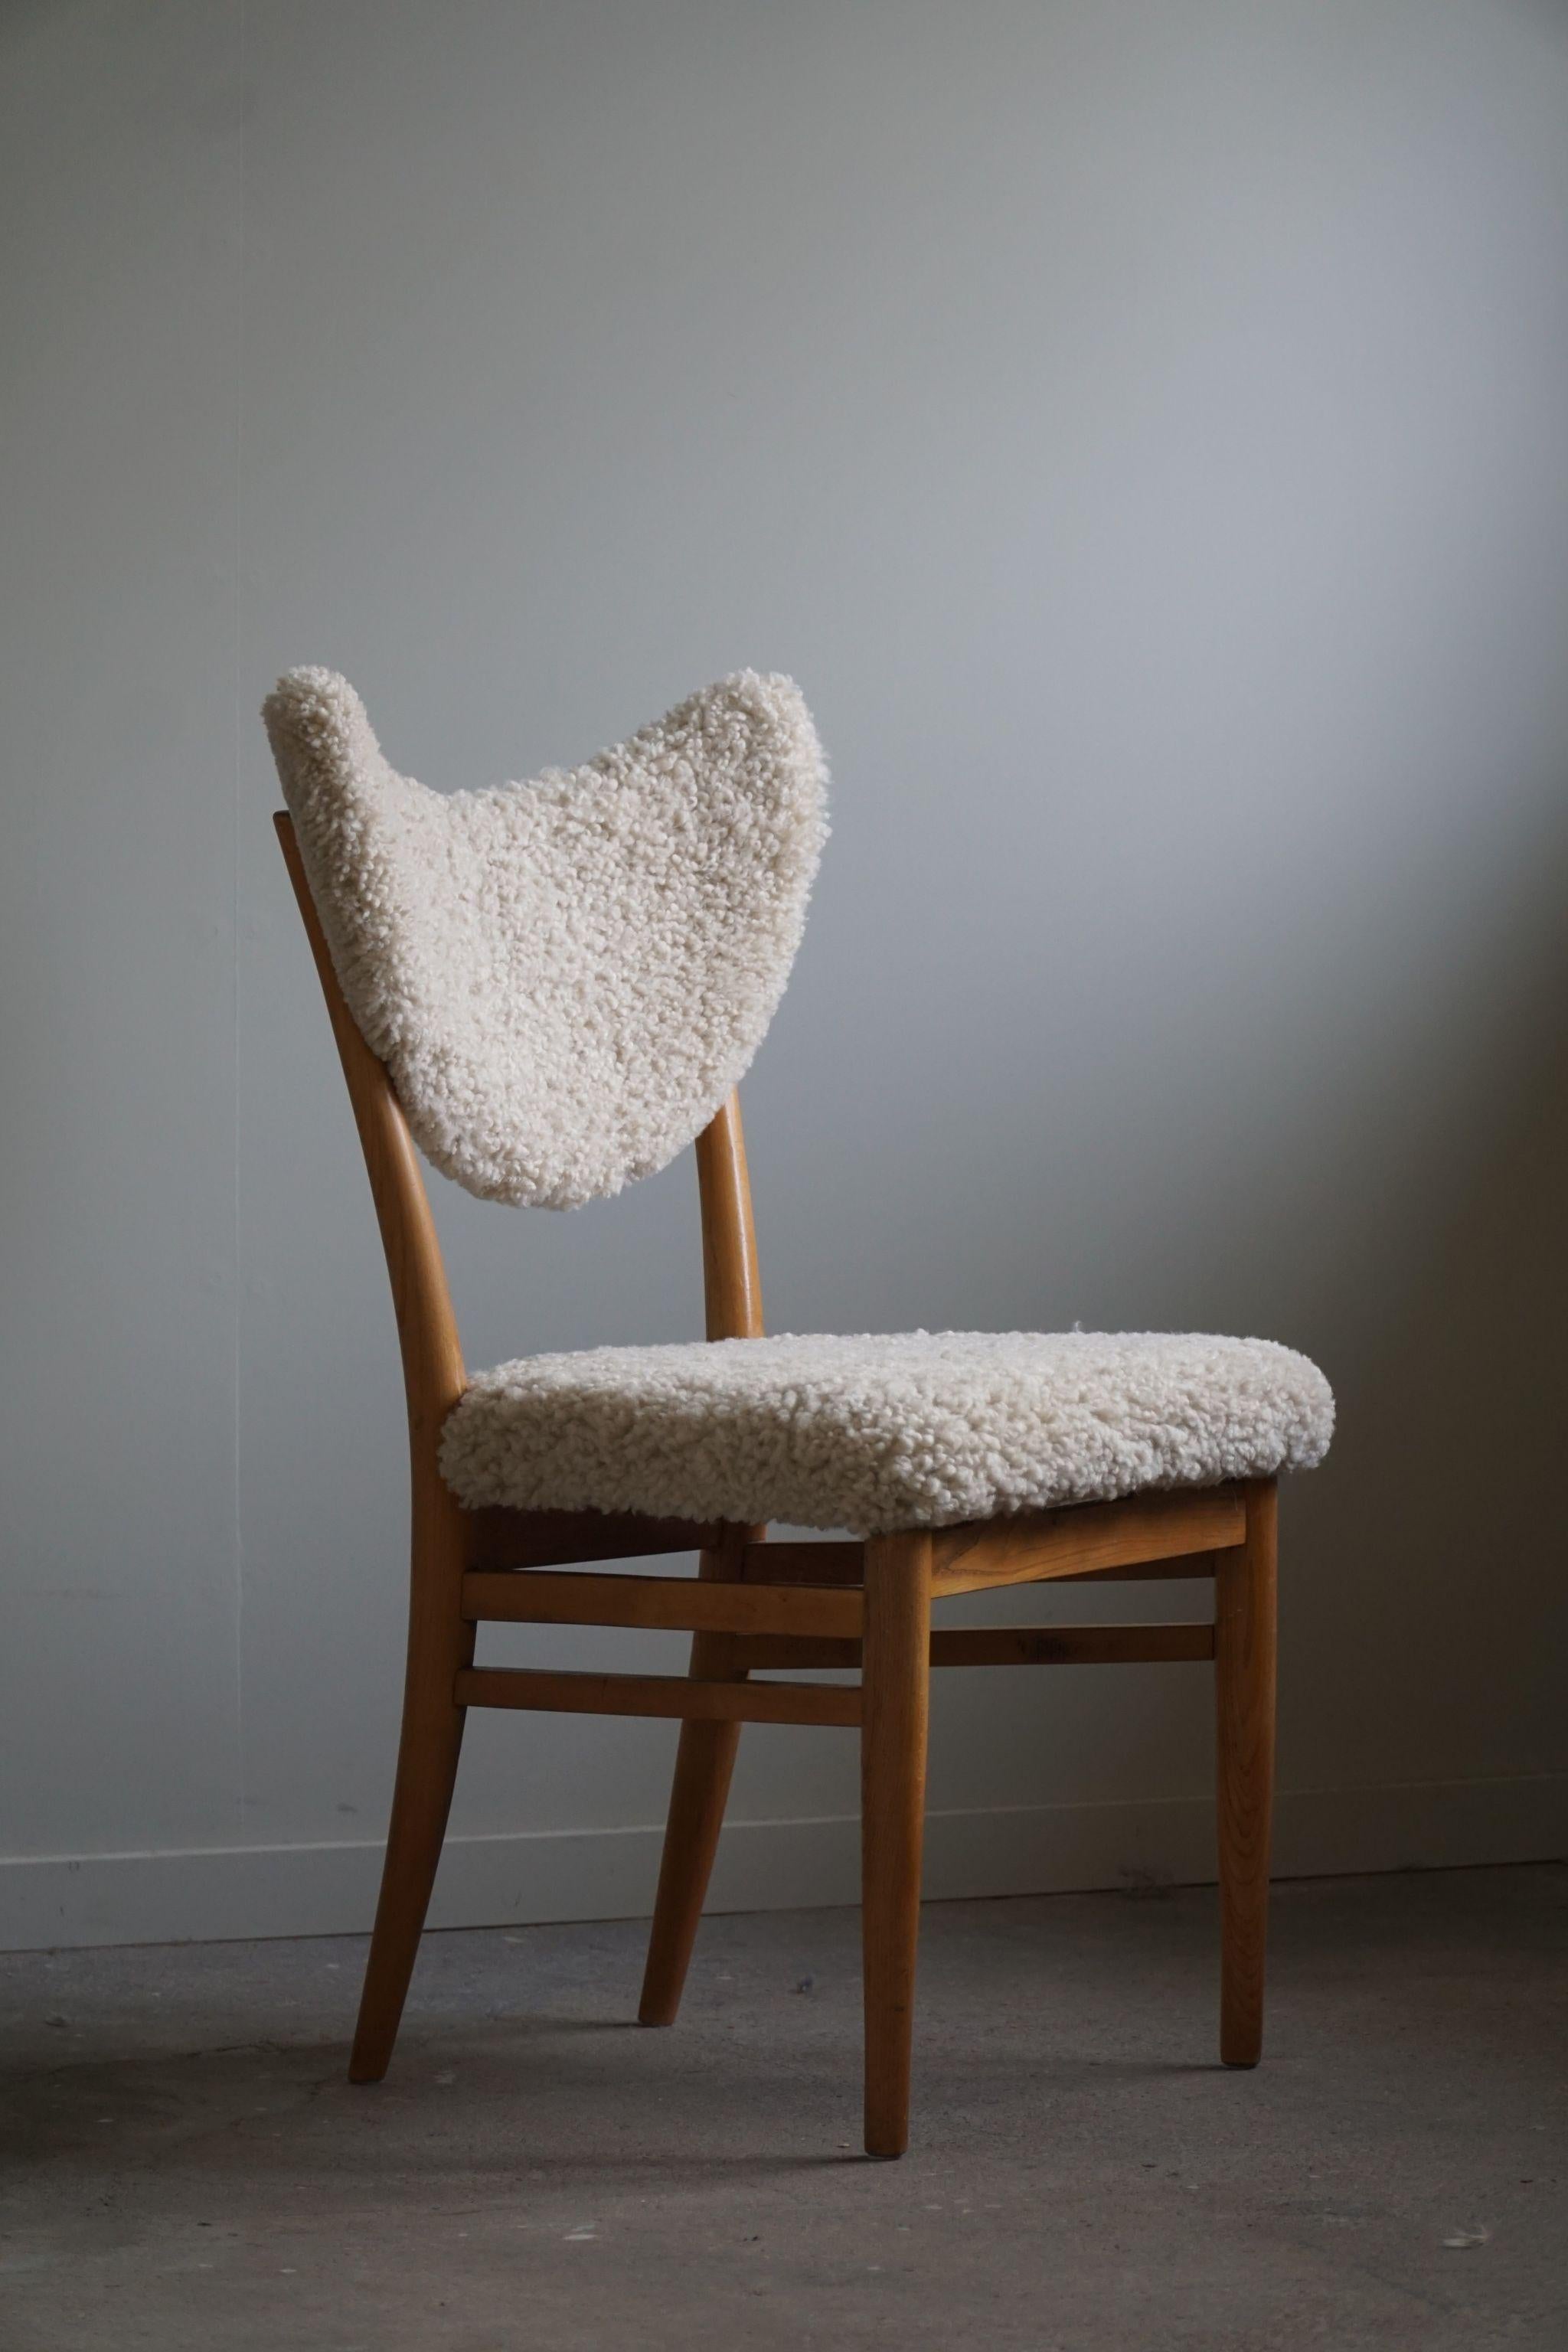 Hvidt & Mølgaard, Set of 4 Chairs in Ash, Reupholstered in Lambswool, 1950s For Sale 8